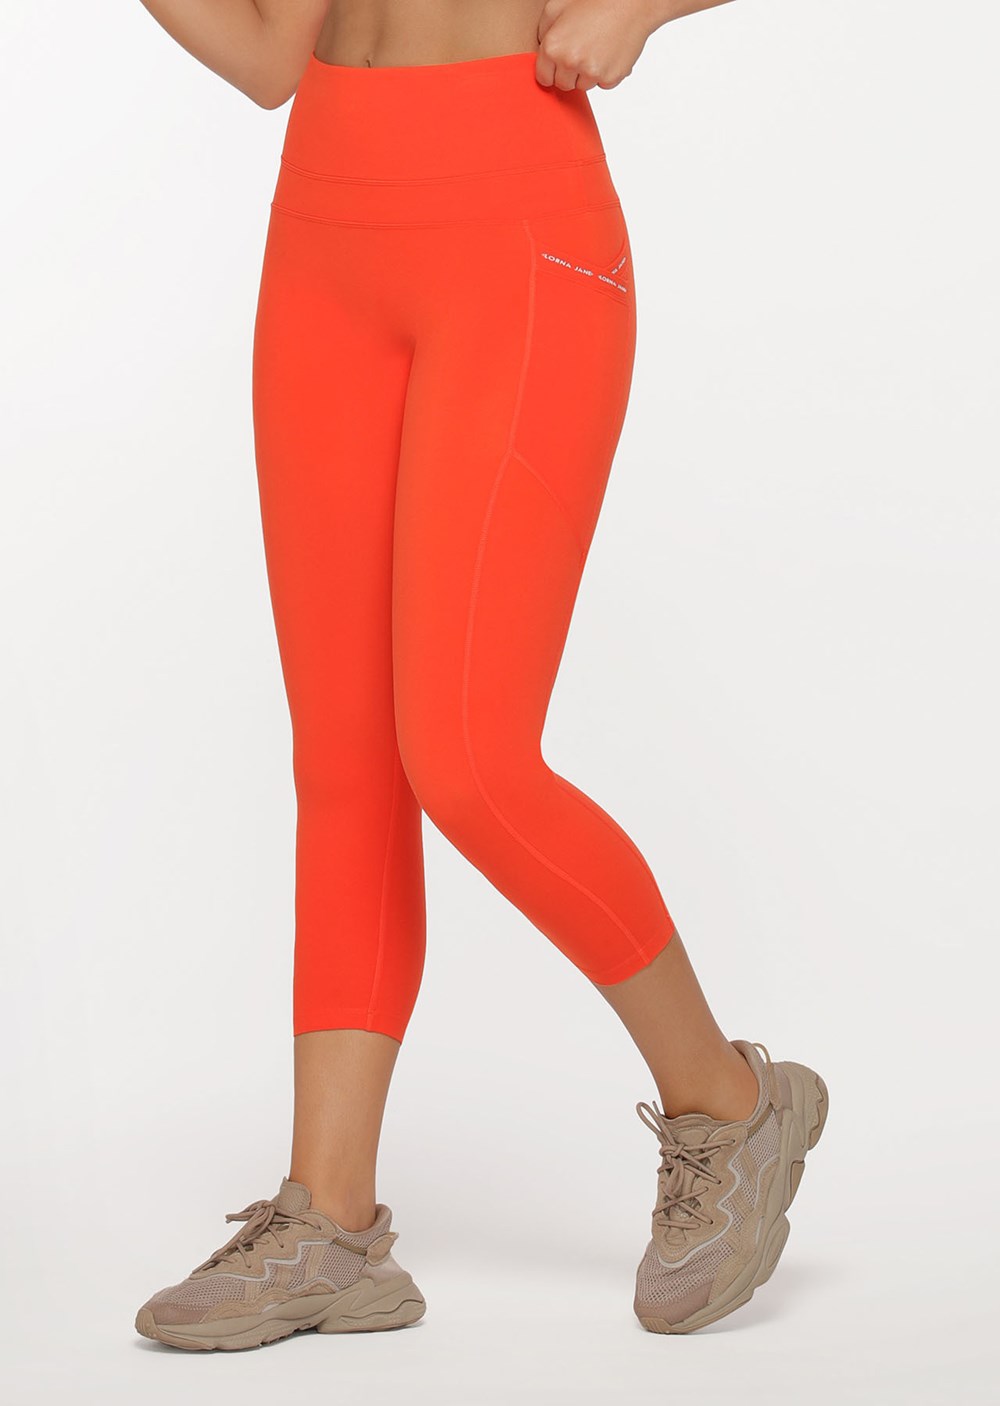 The Best Lorna Jane Leggings To Buy - Chilli No Ride Booty Pocket 7/8 Womens